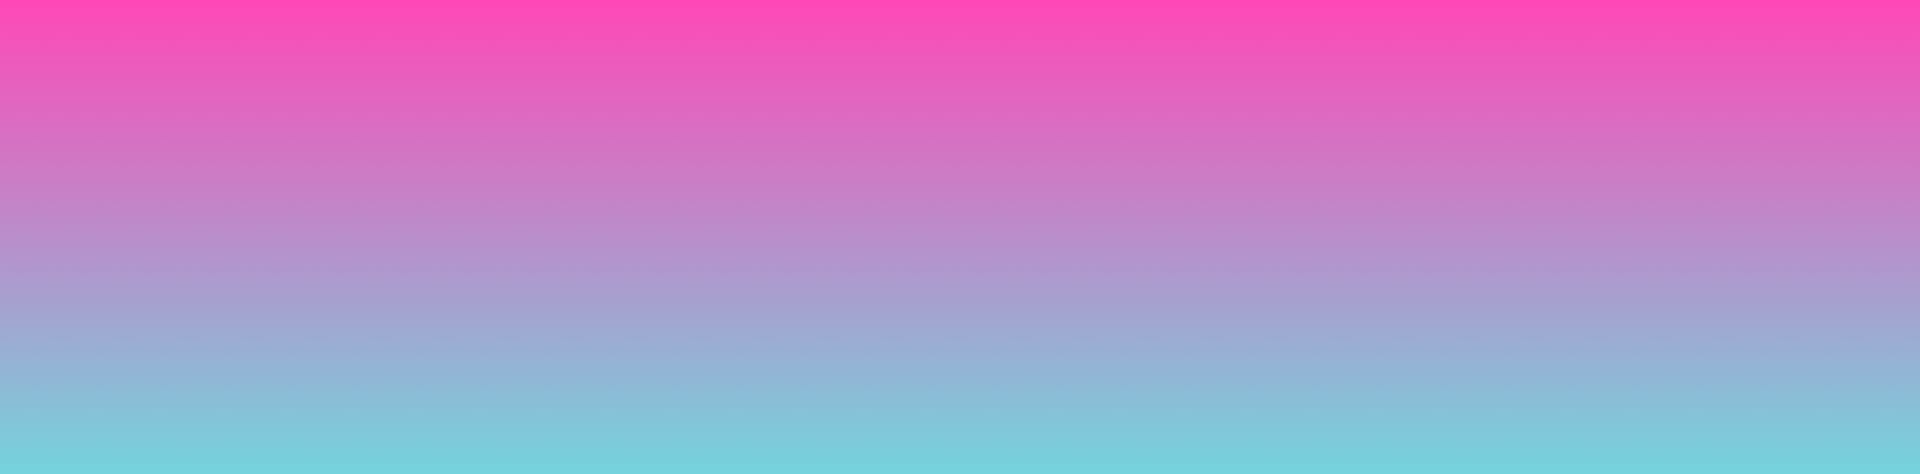 A pink to blue gradient